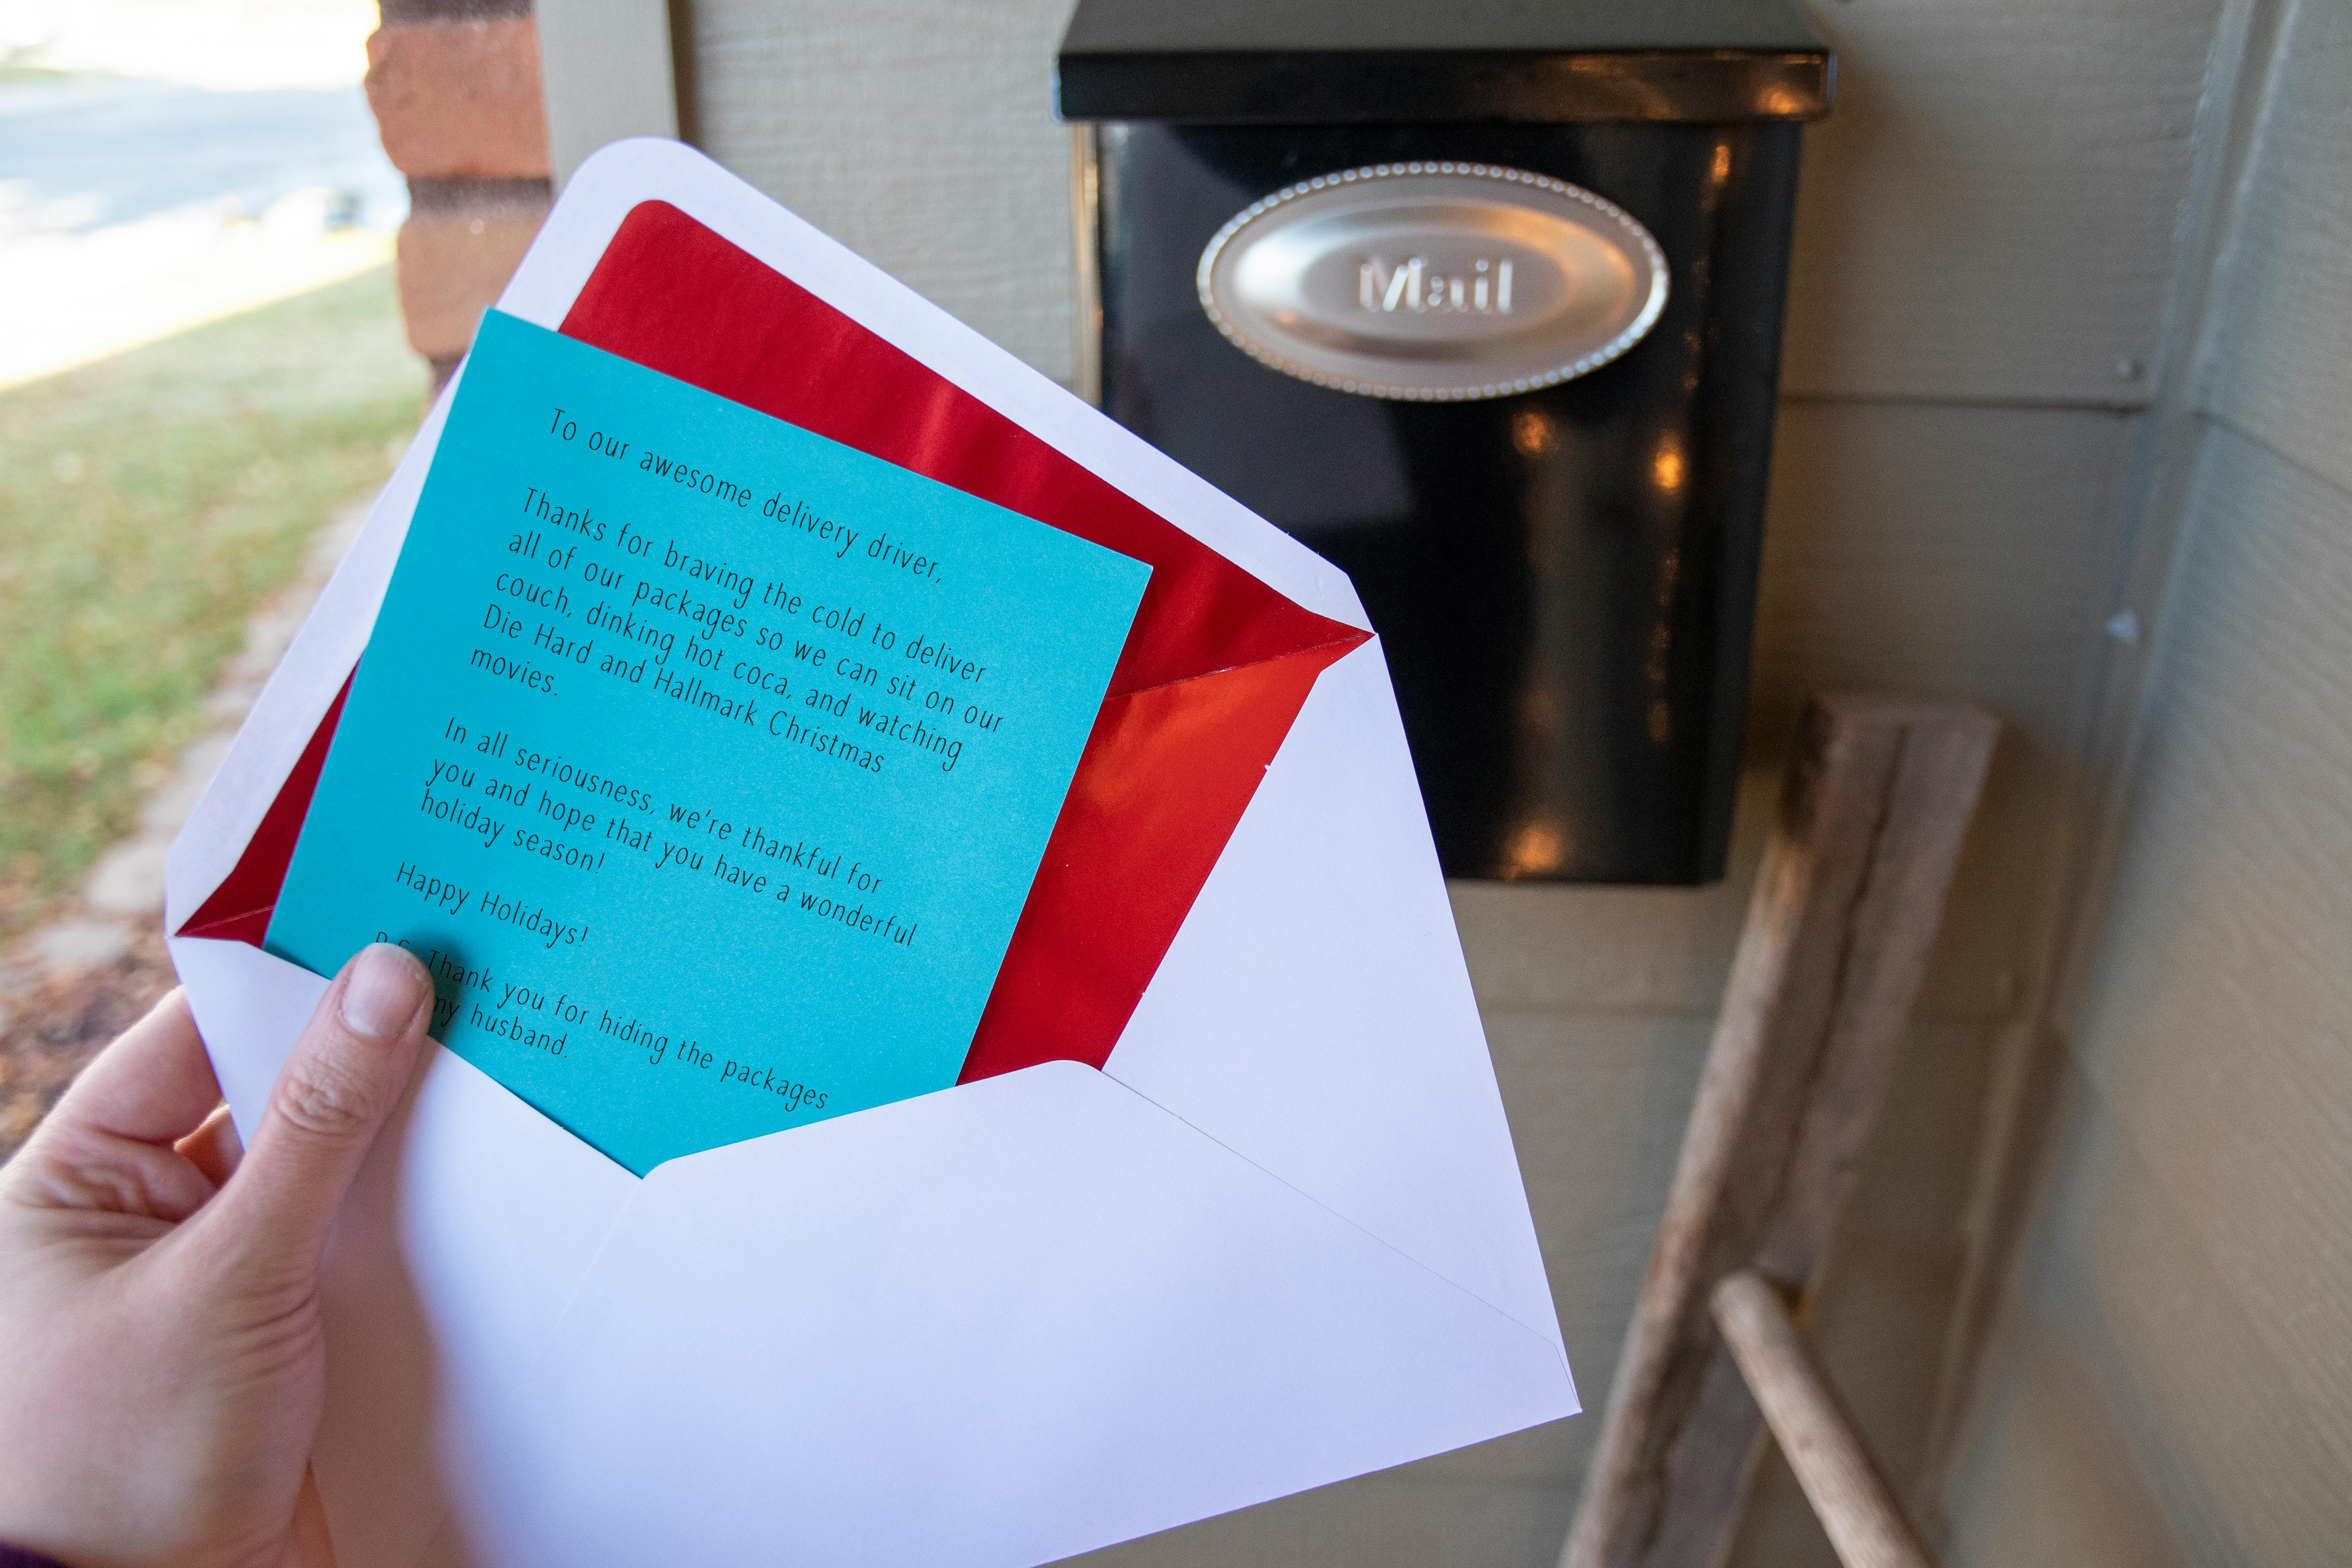 A thank you note held next to a mail box.